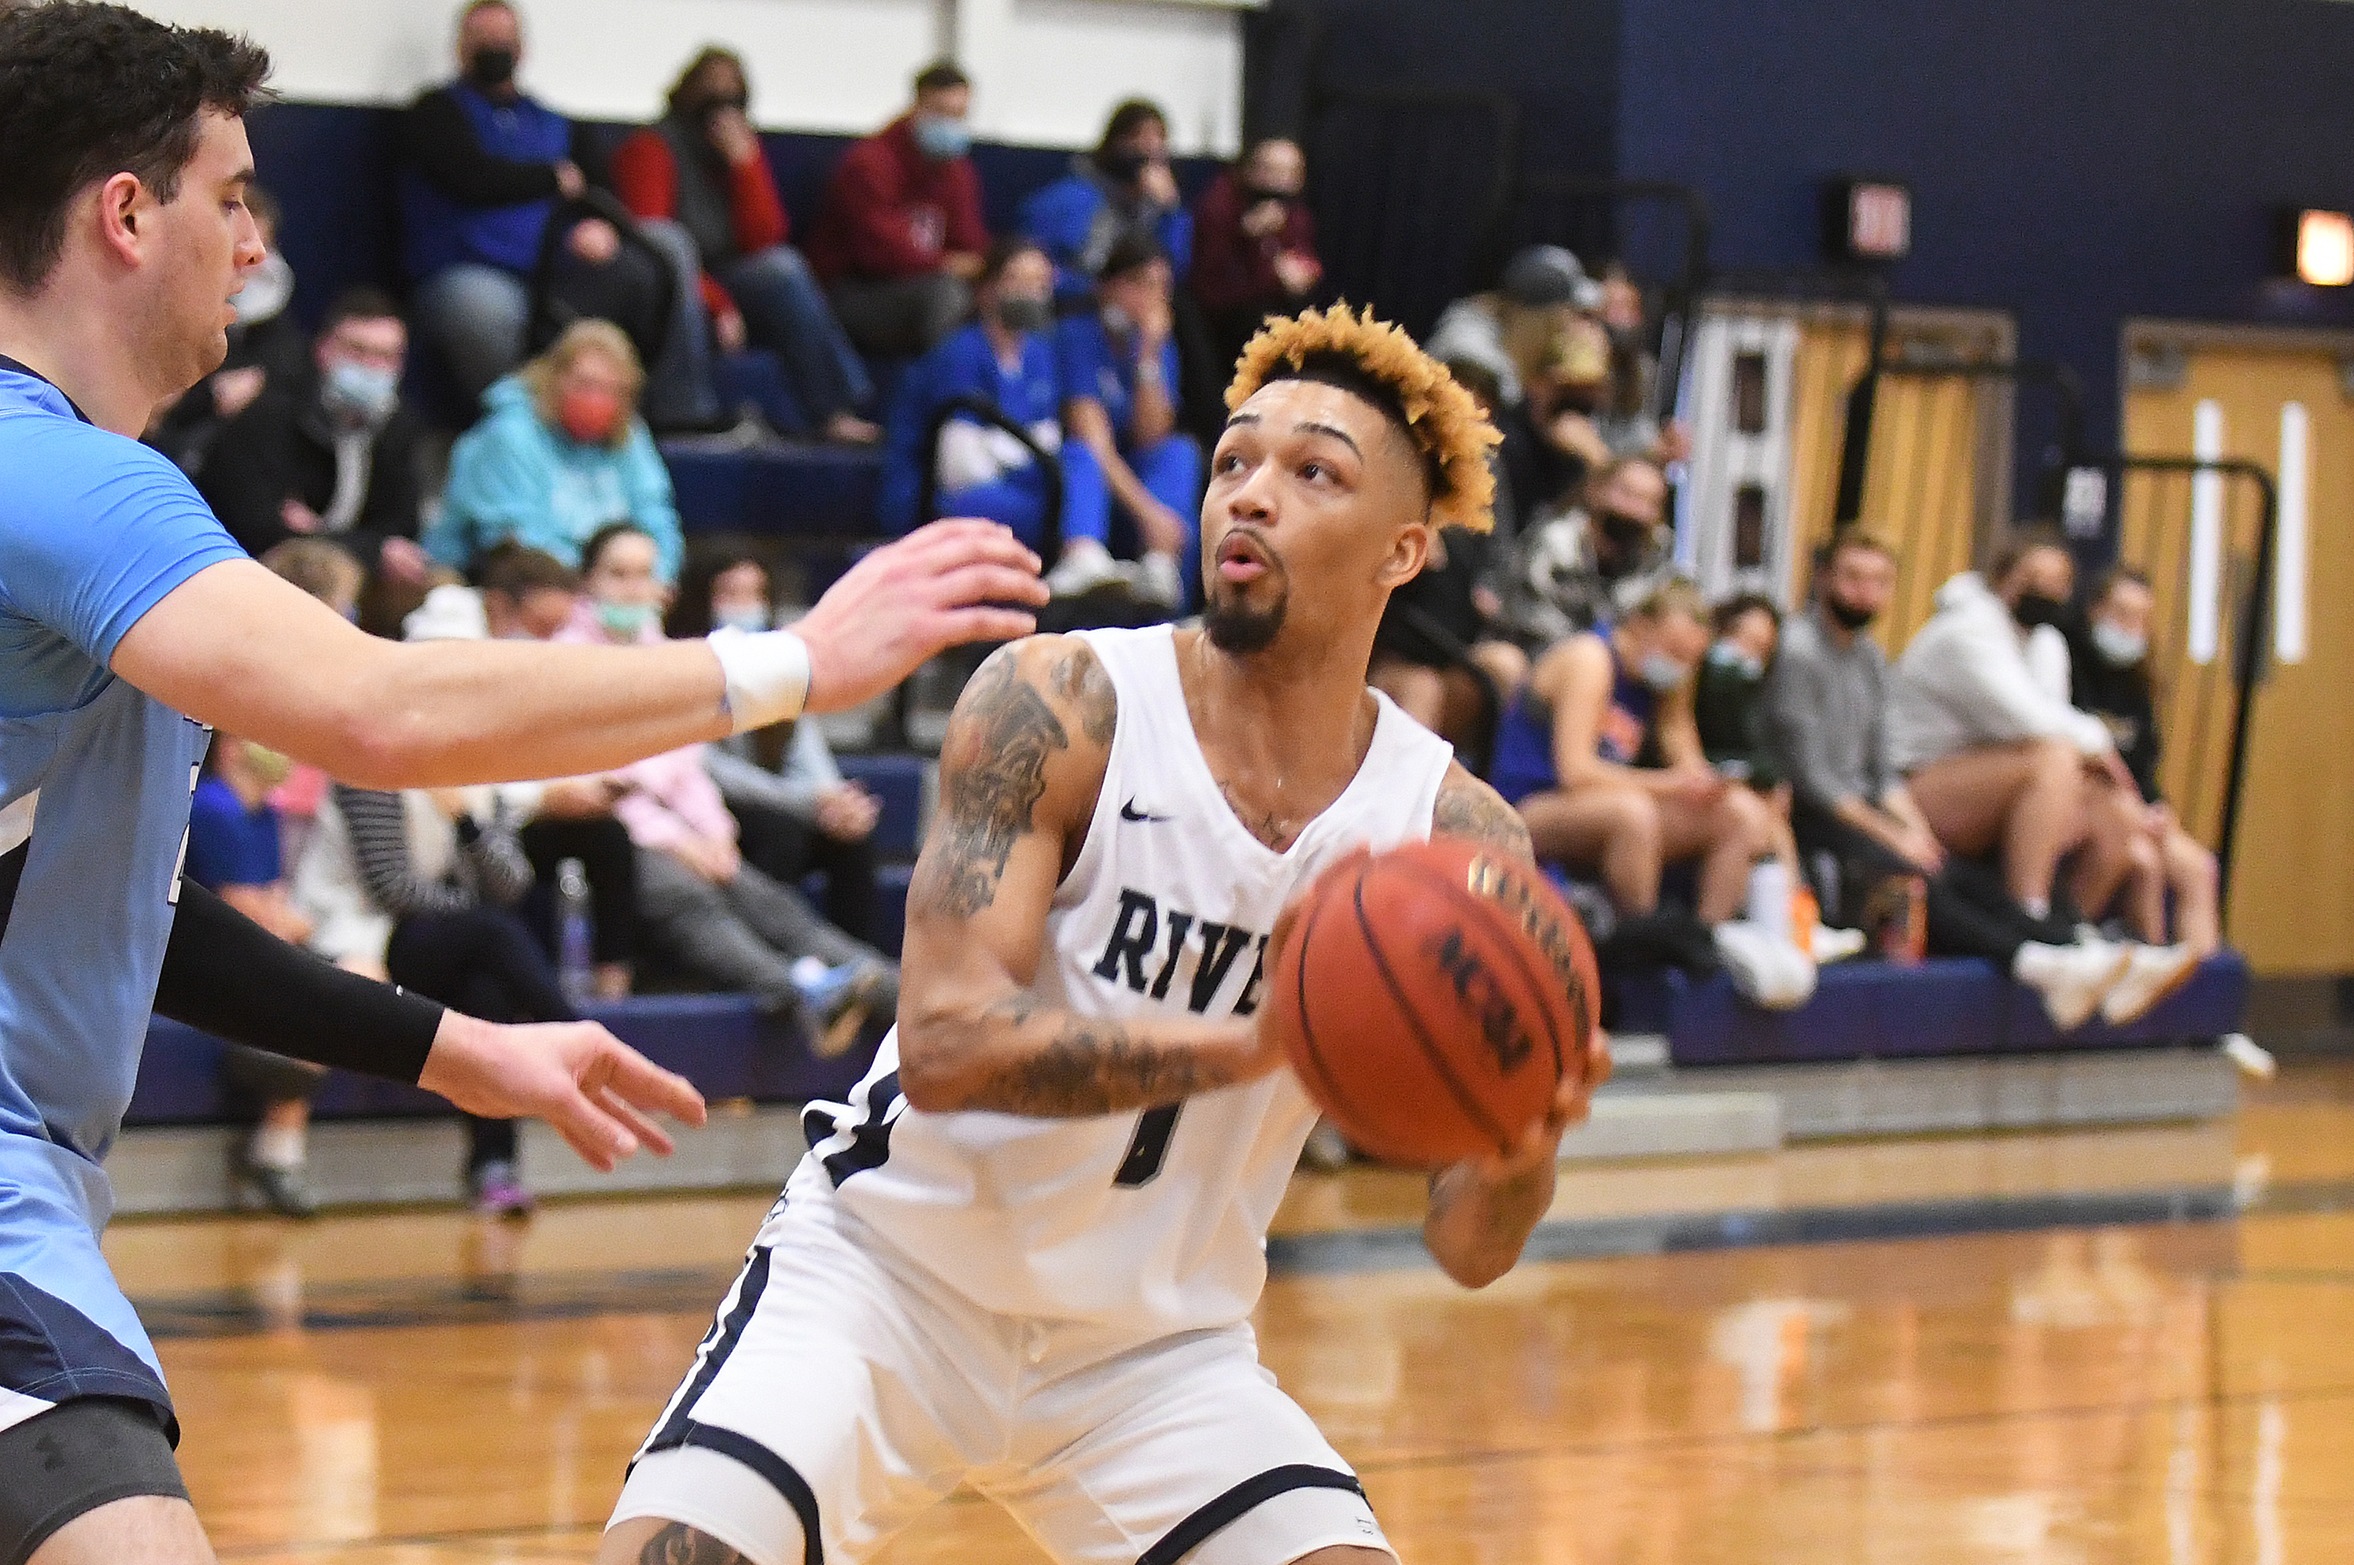 Men’s Basketball Falls in Overtime to Anna Maria